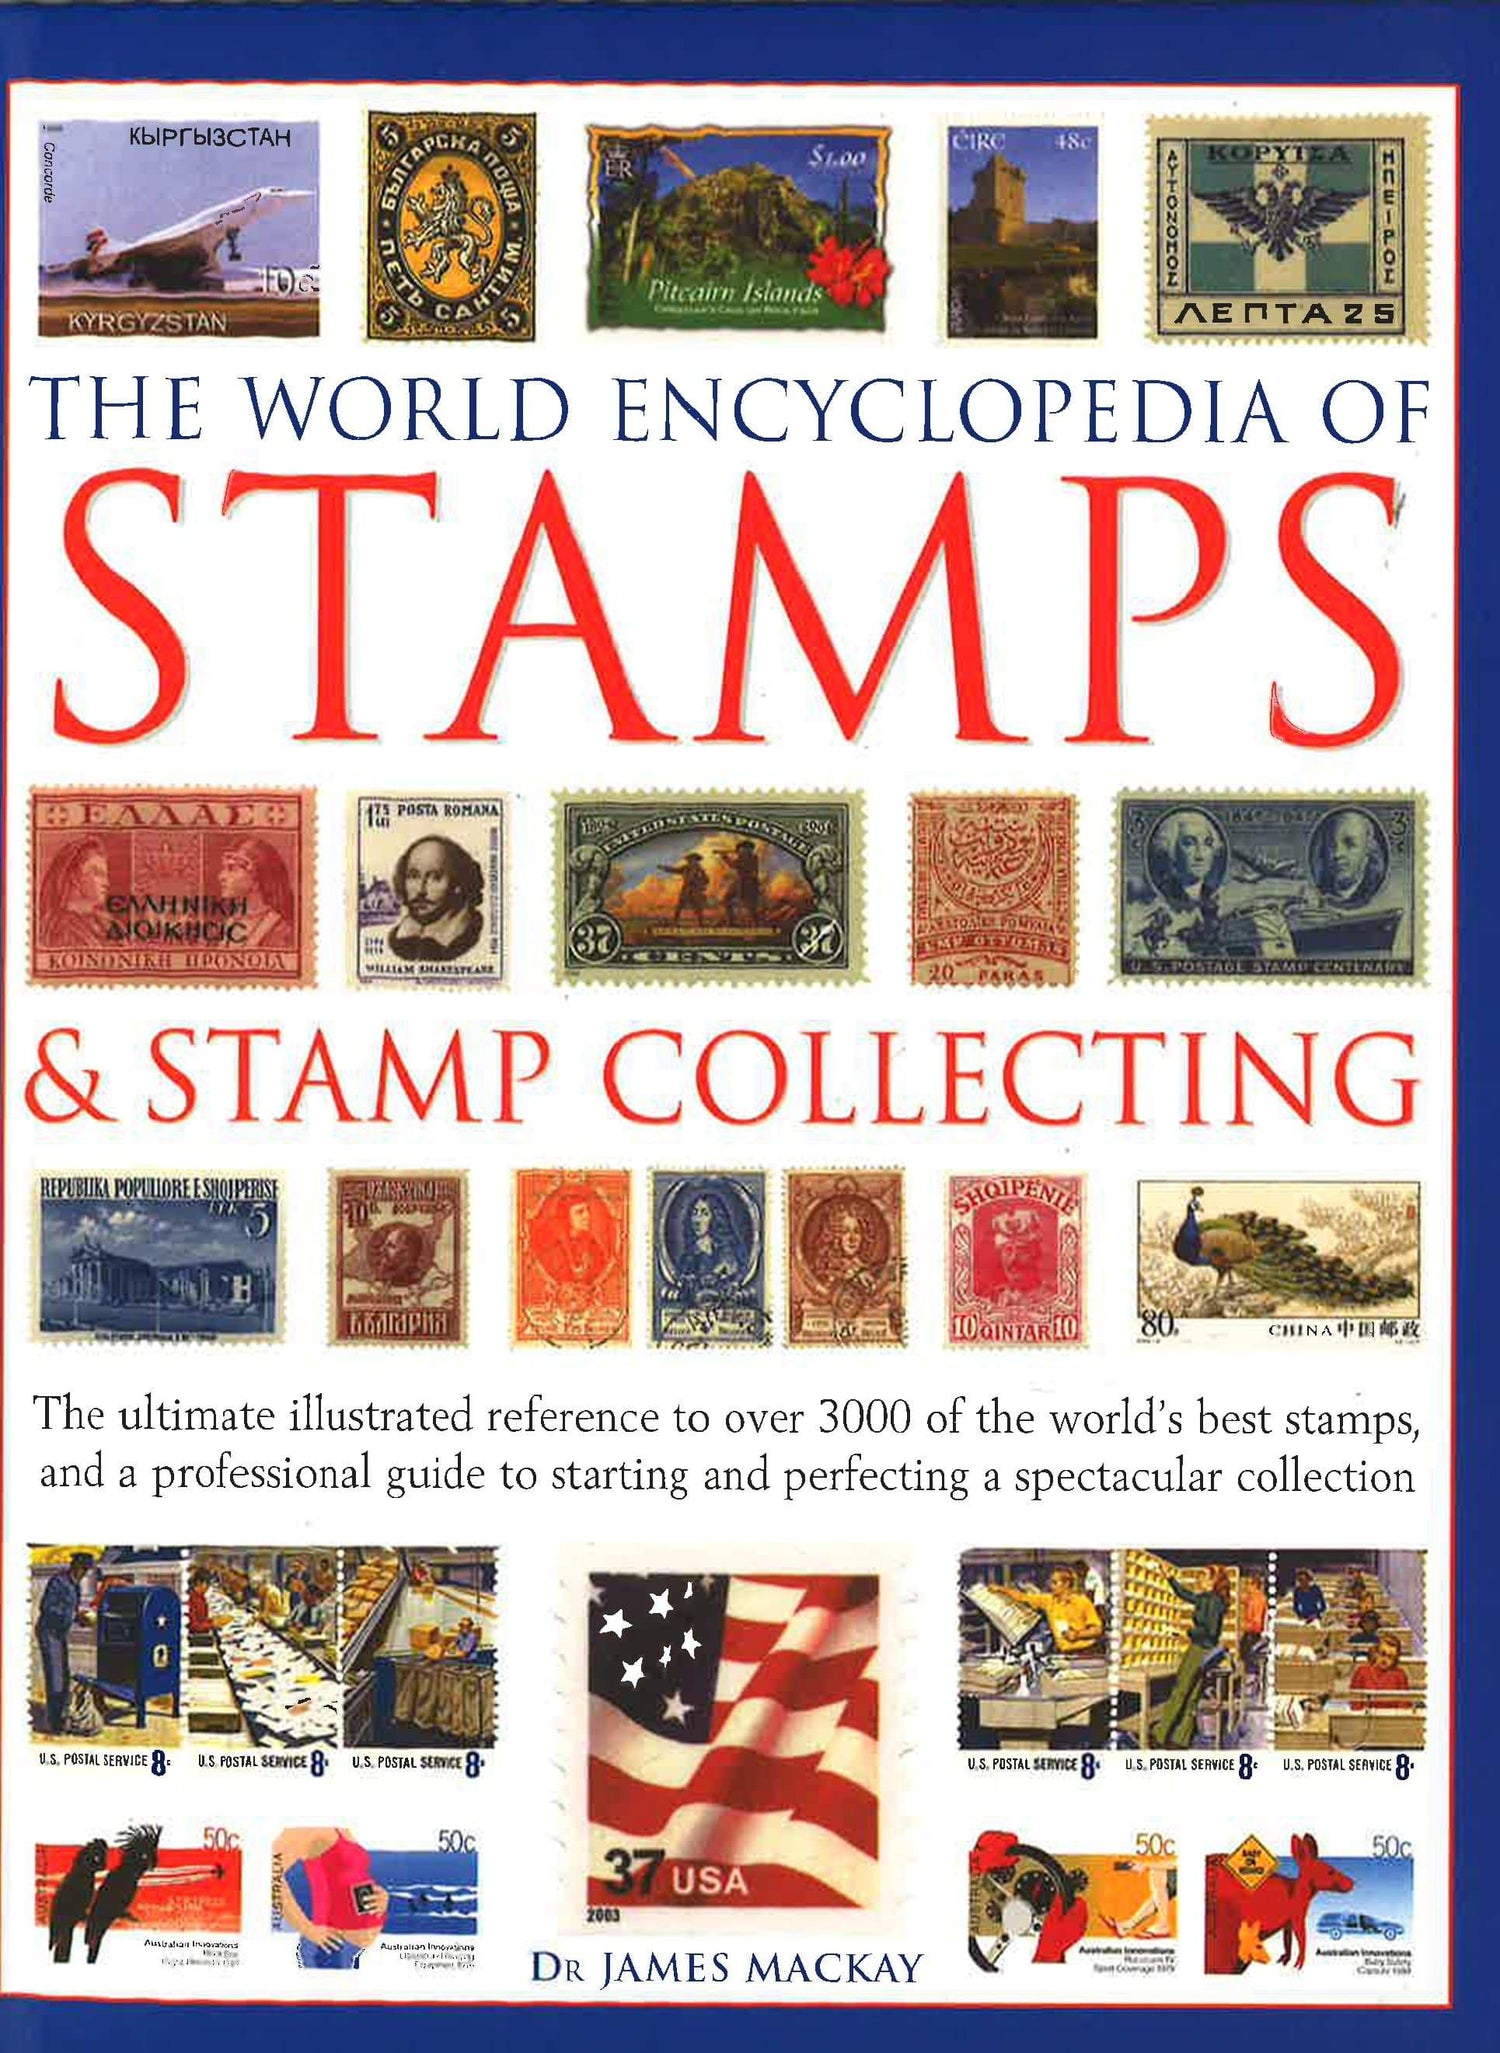 The World Encyclopedia of Stamps and Stamp Collecting: The Ultimate Illustrated Reference to Over 3000 of the Worlds Best Stamps, and a Professional Guide to Starting and Perfecting a Spectacular Collection [Book]